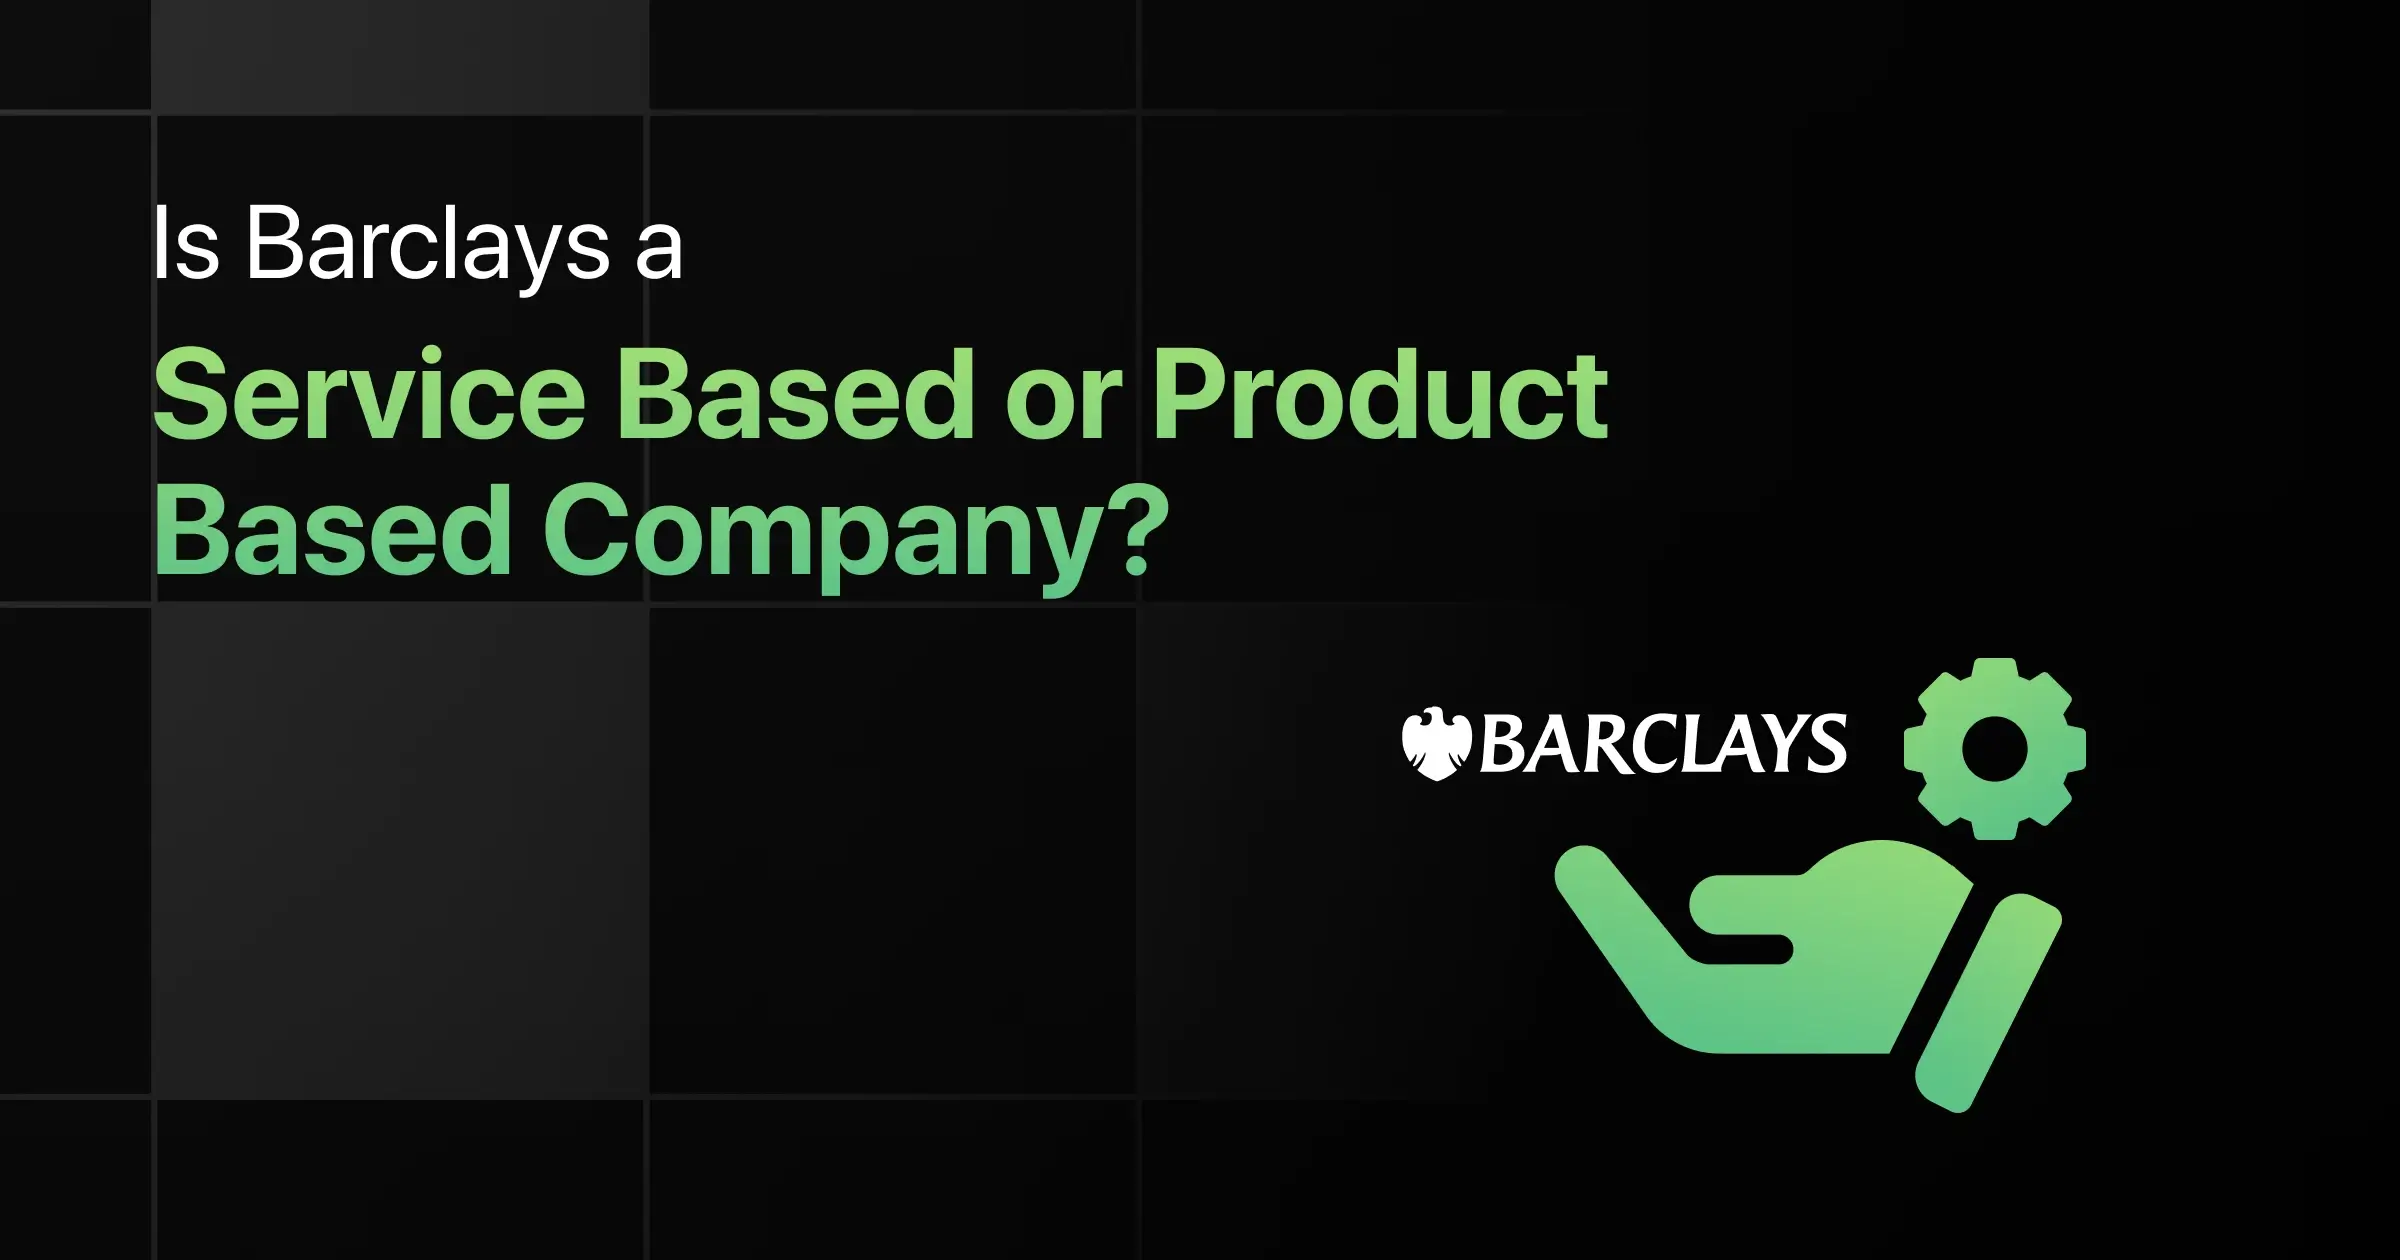 Is Barclays a Service Based or Product Based Company?